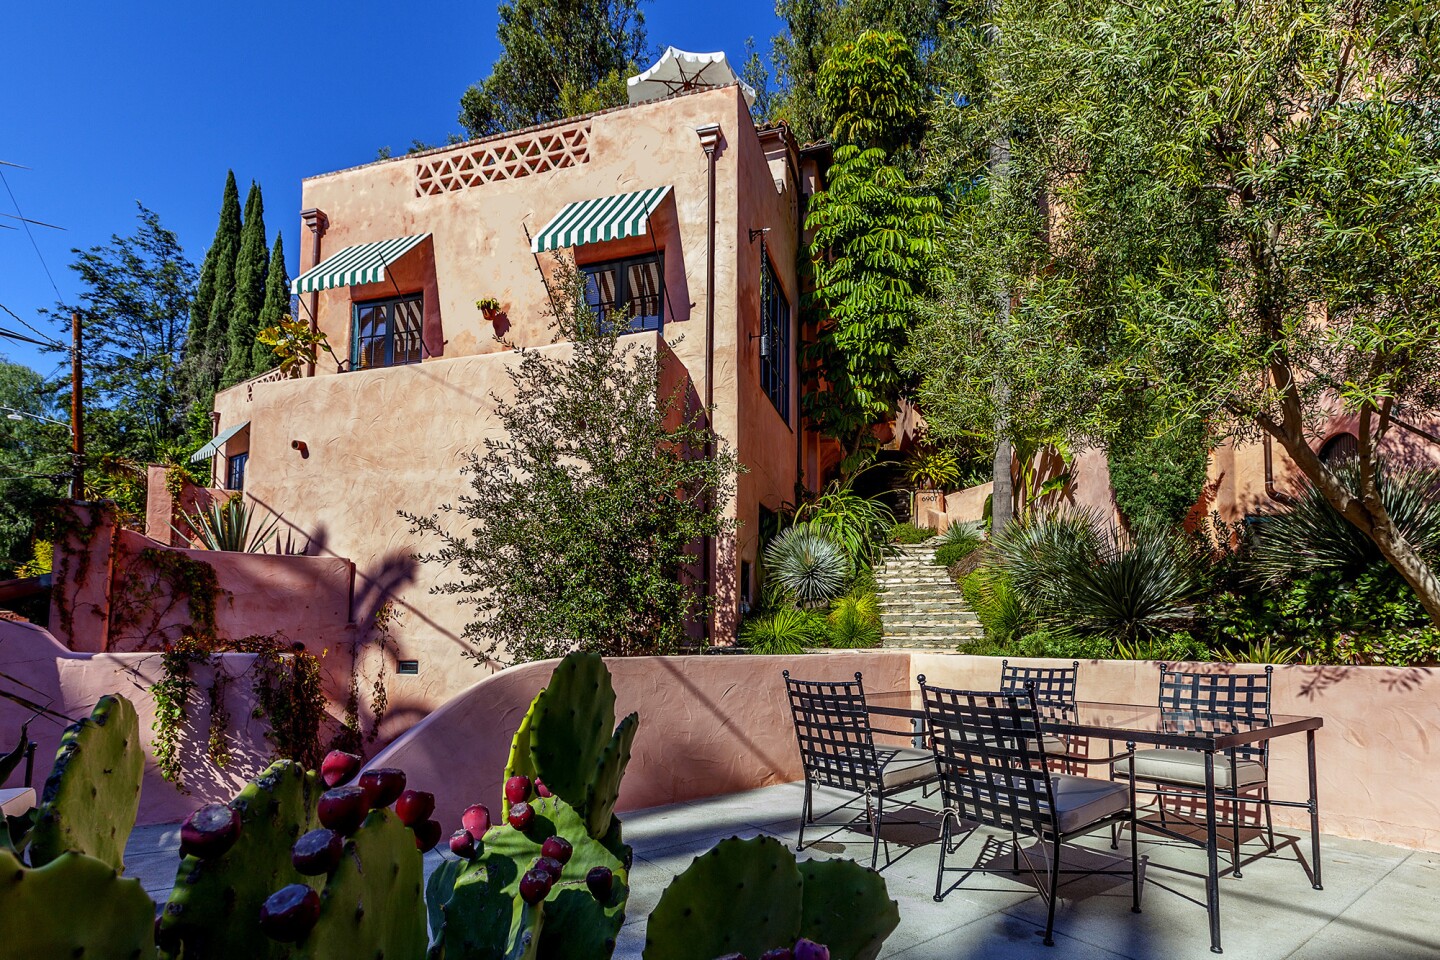 The Spanish-style complex in Hollywood Hills is meant to evoke the villages of Andalusia.